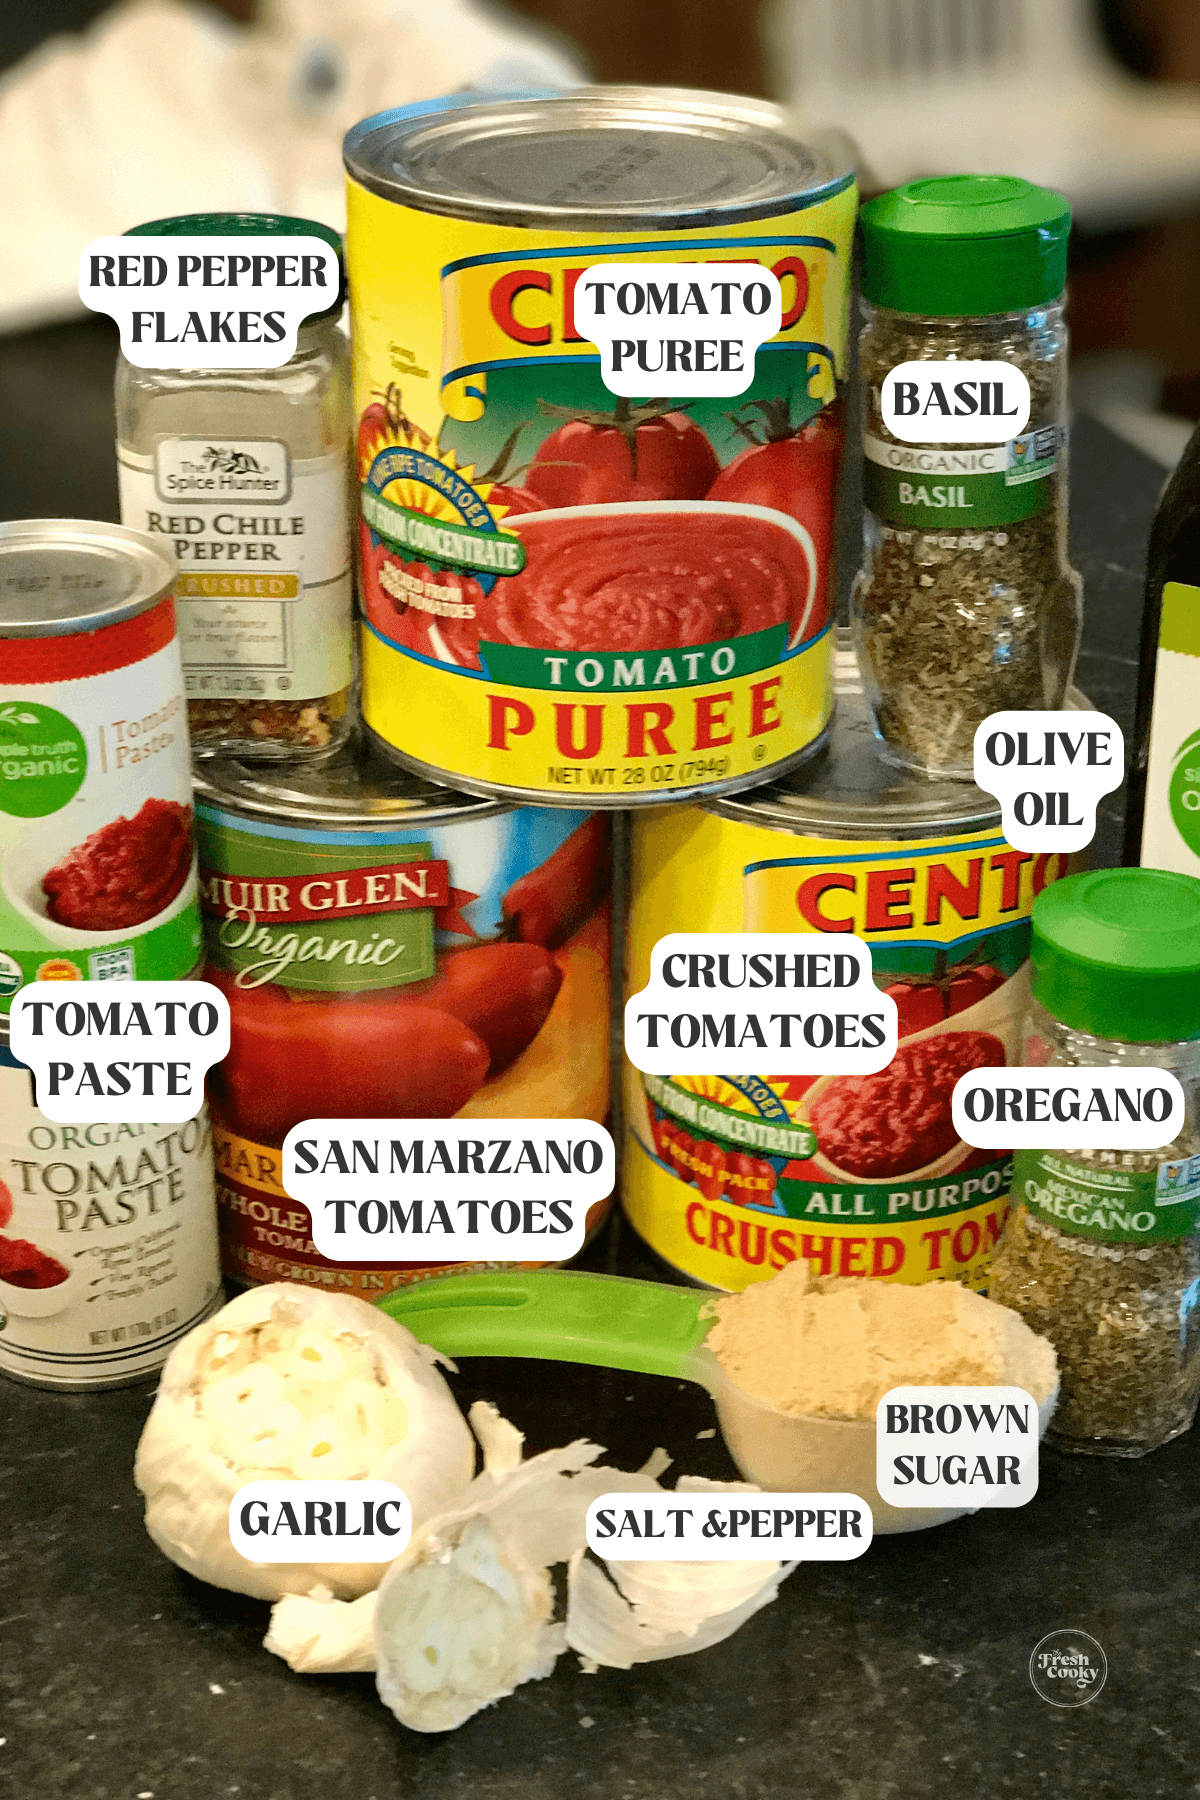 Labeled ingredients for Italian spaghetti sauce.